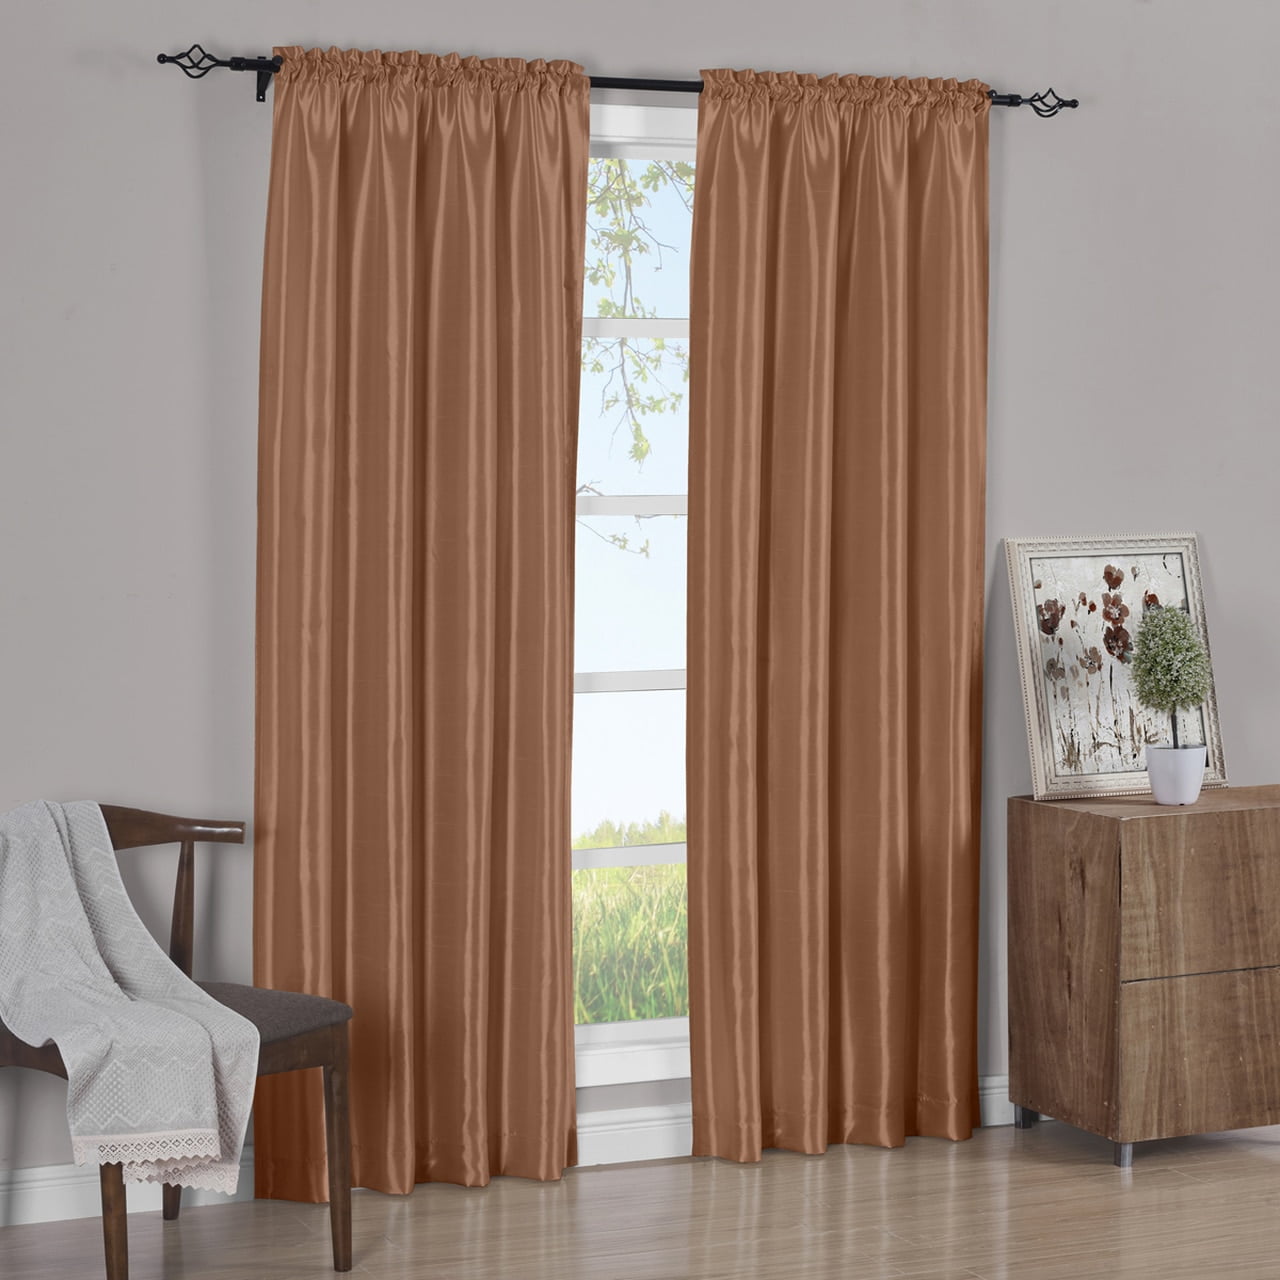 Soho Faux Silk Rod Pocket Curtains and Coordinating Valance; Sold Separately 